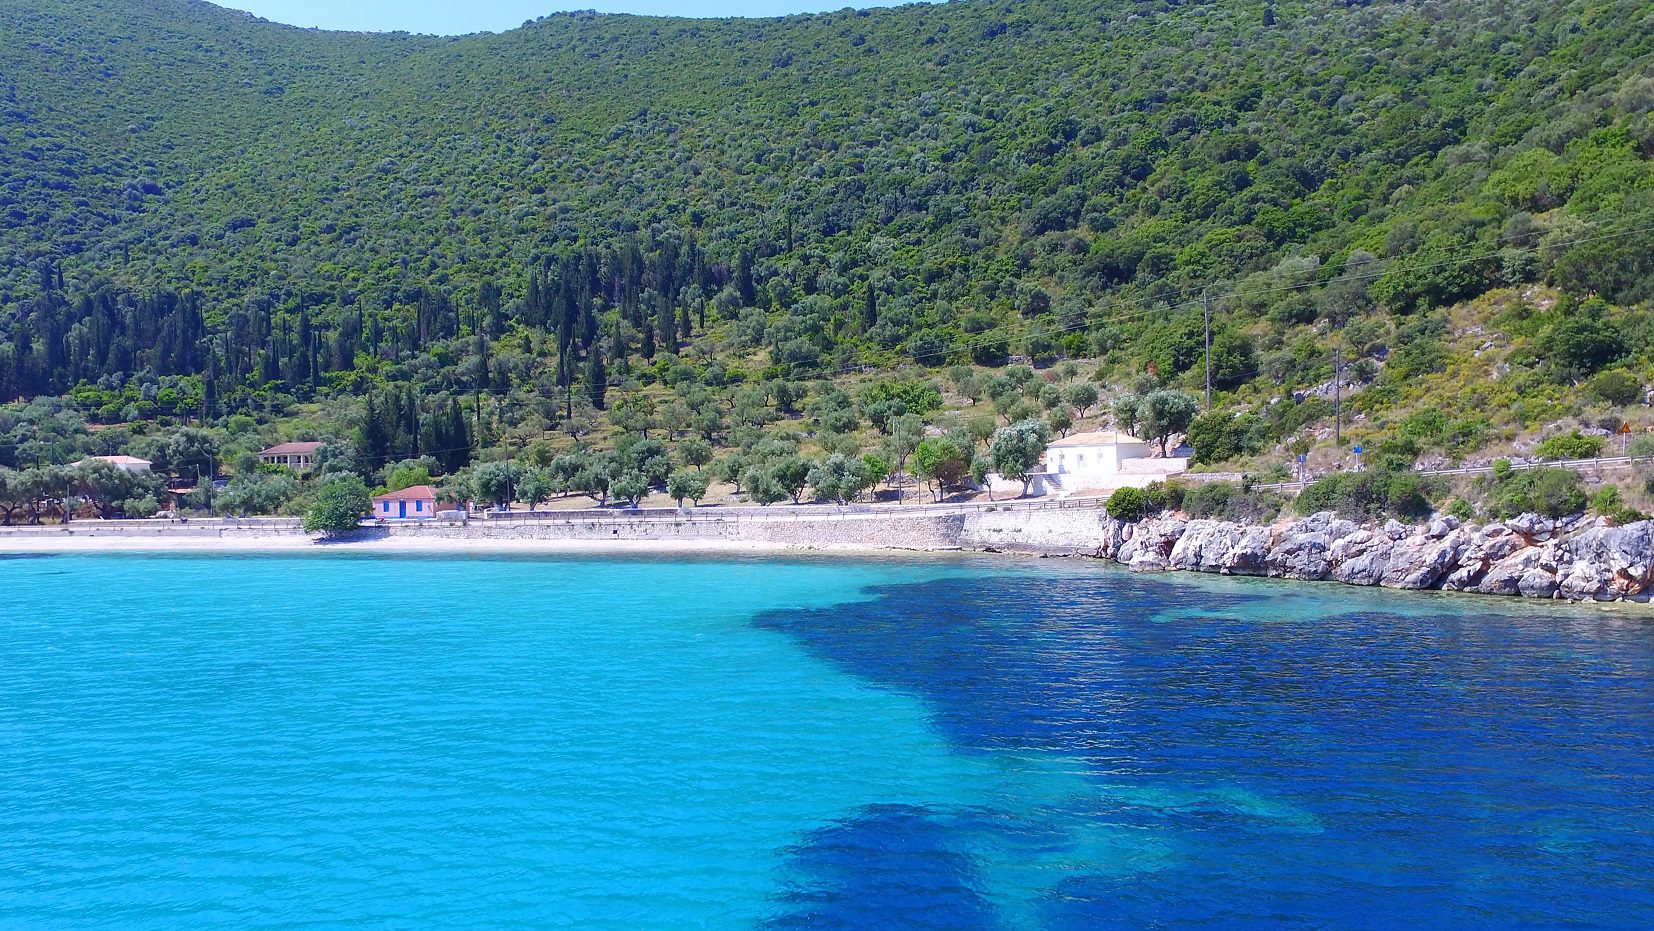 Aerial view of land for sale Ithaca Greece, Brosta Aetos